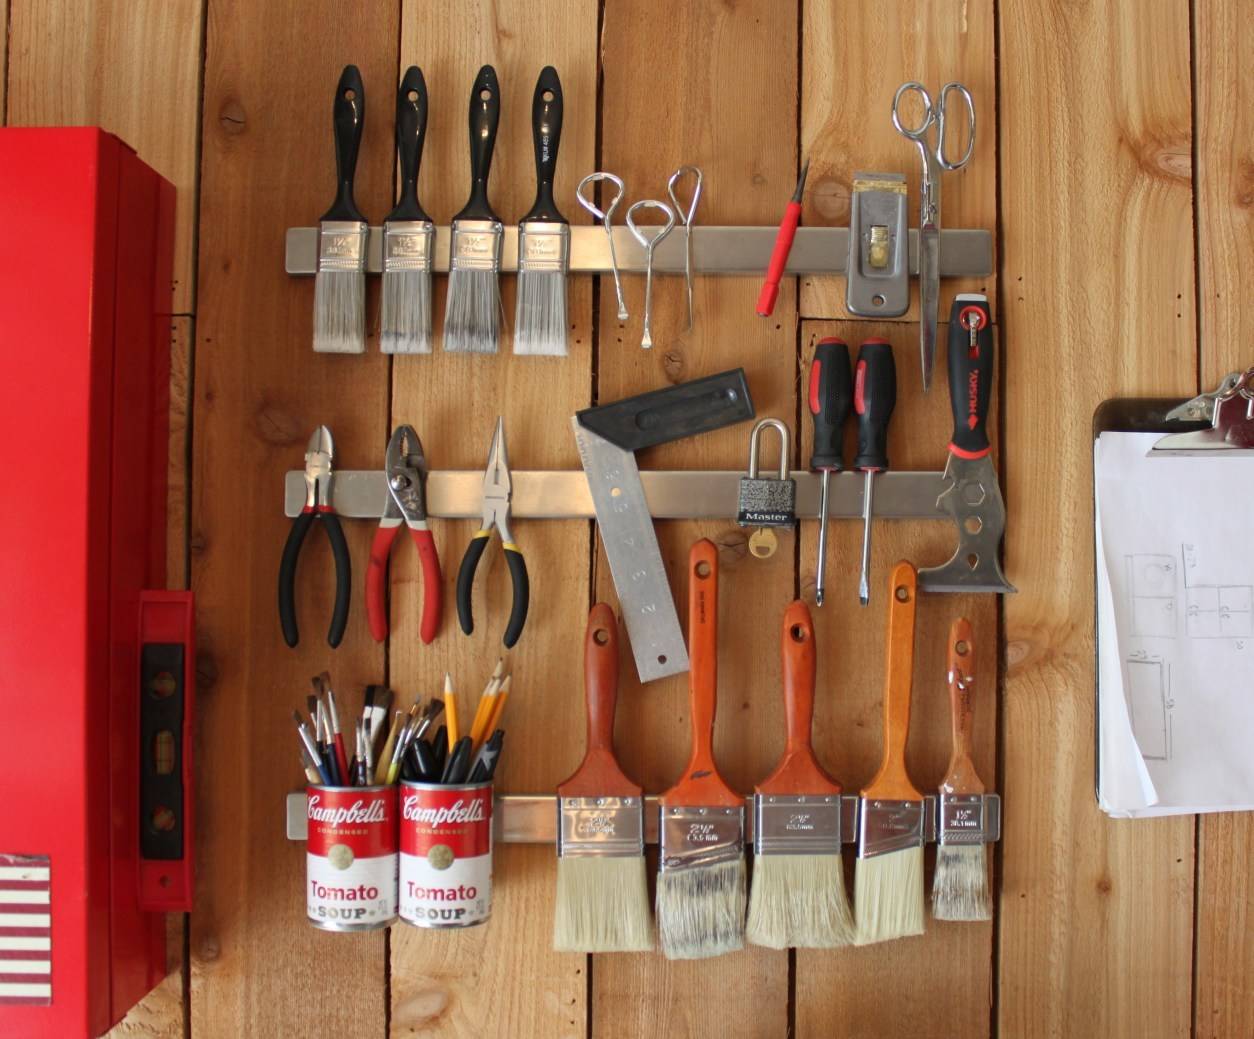 Tidy up your tools with magnetic knife racks